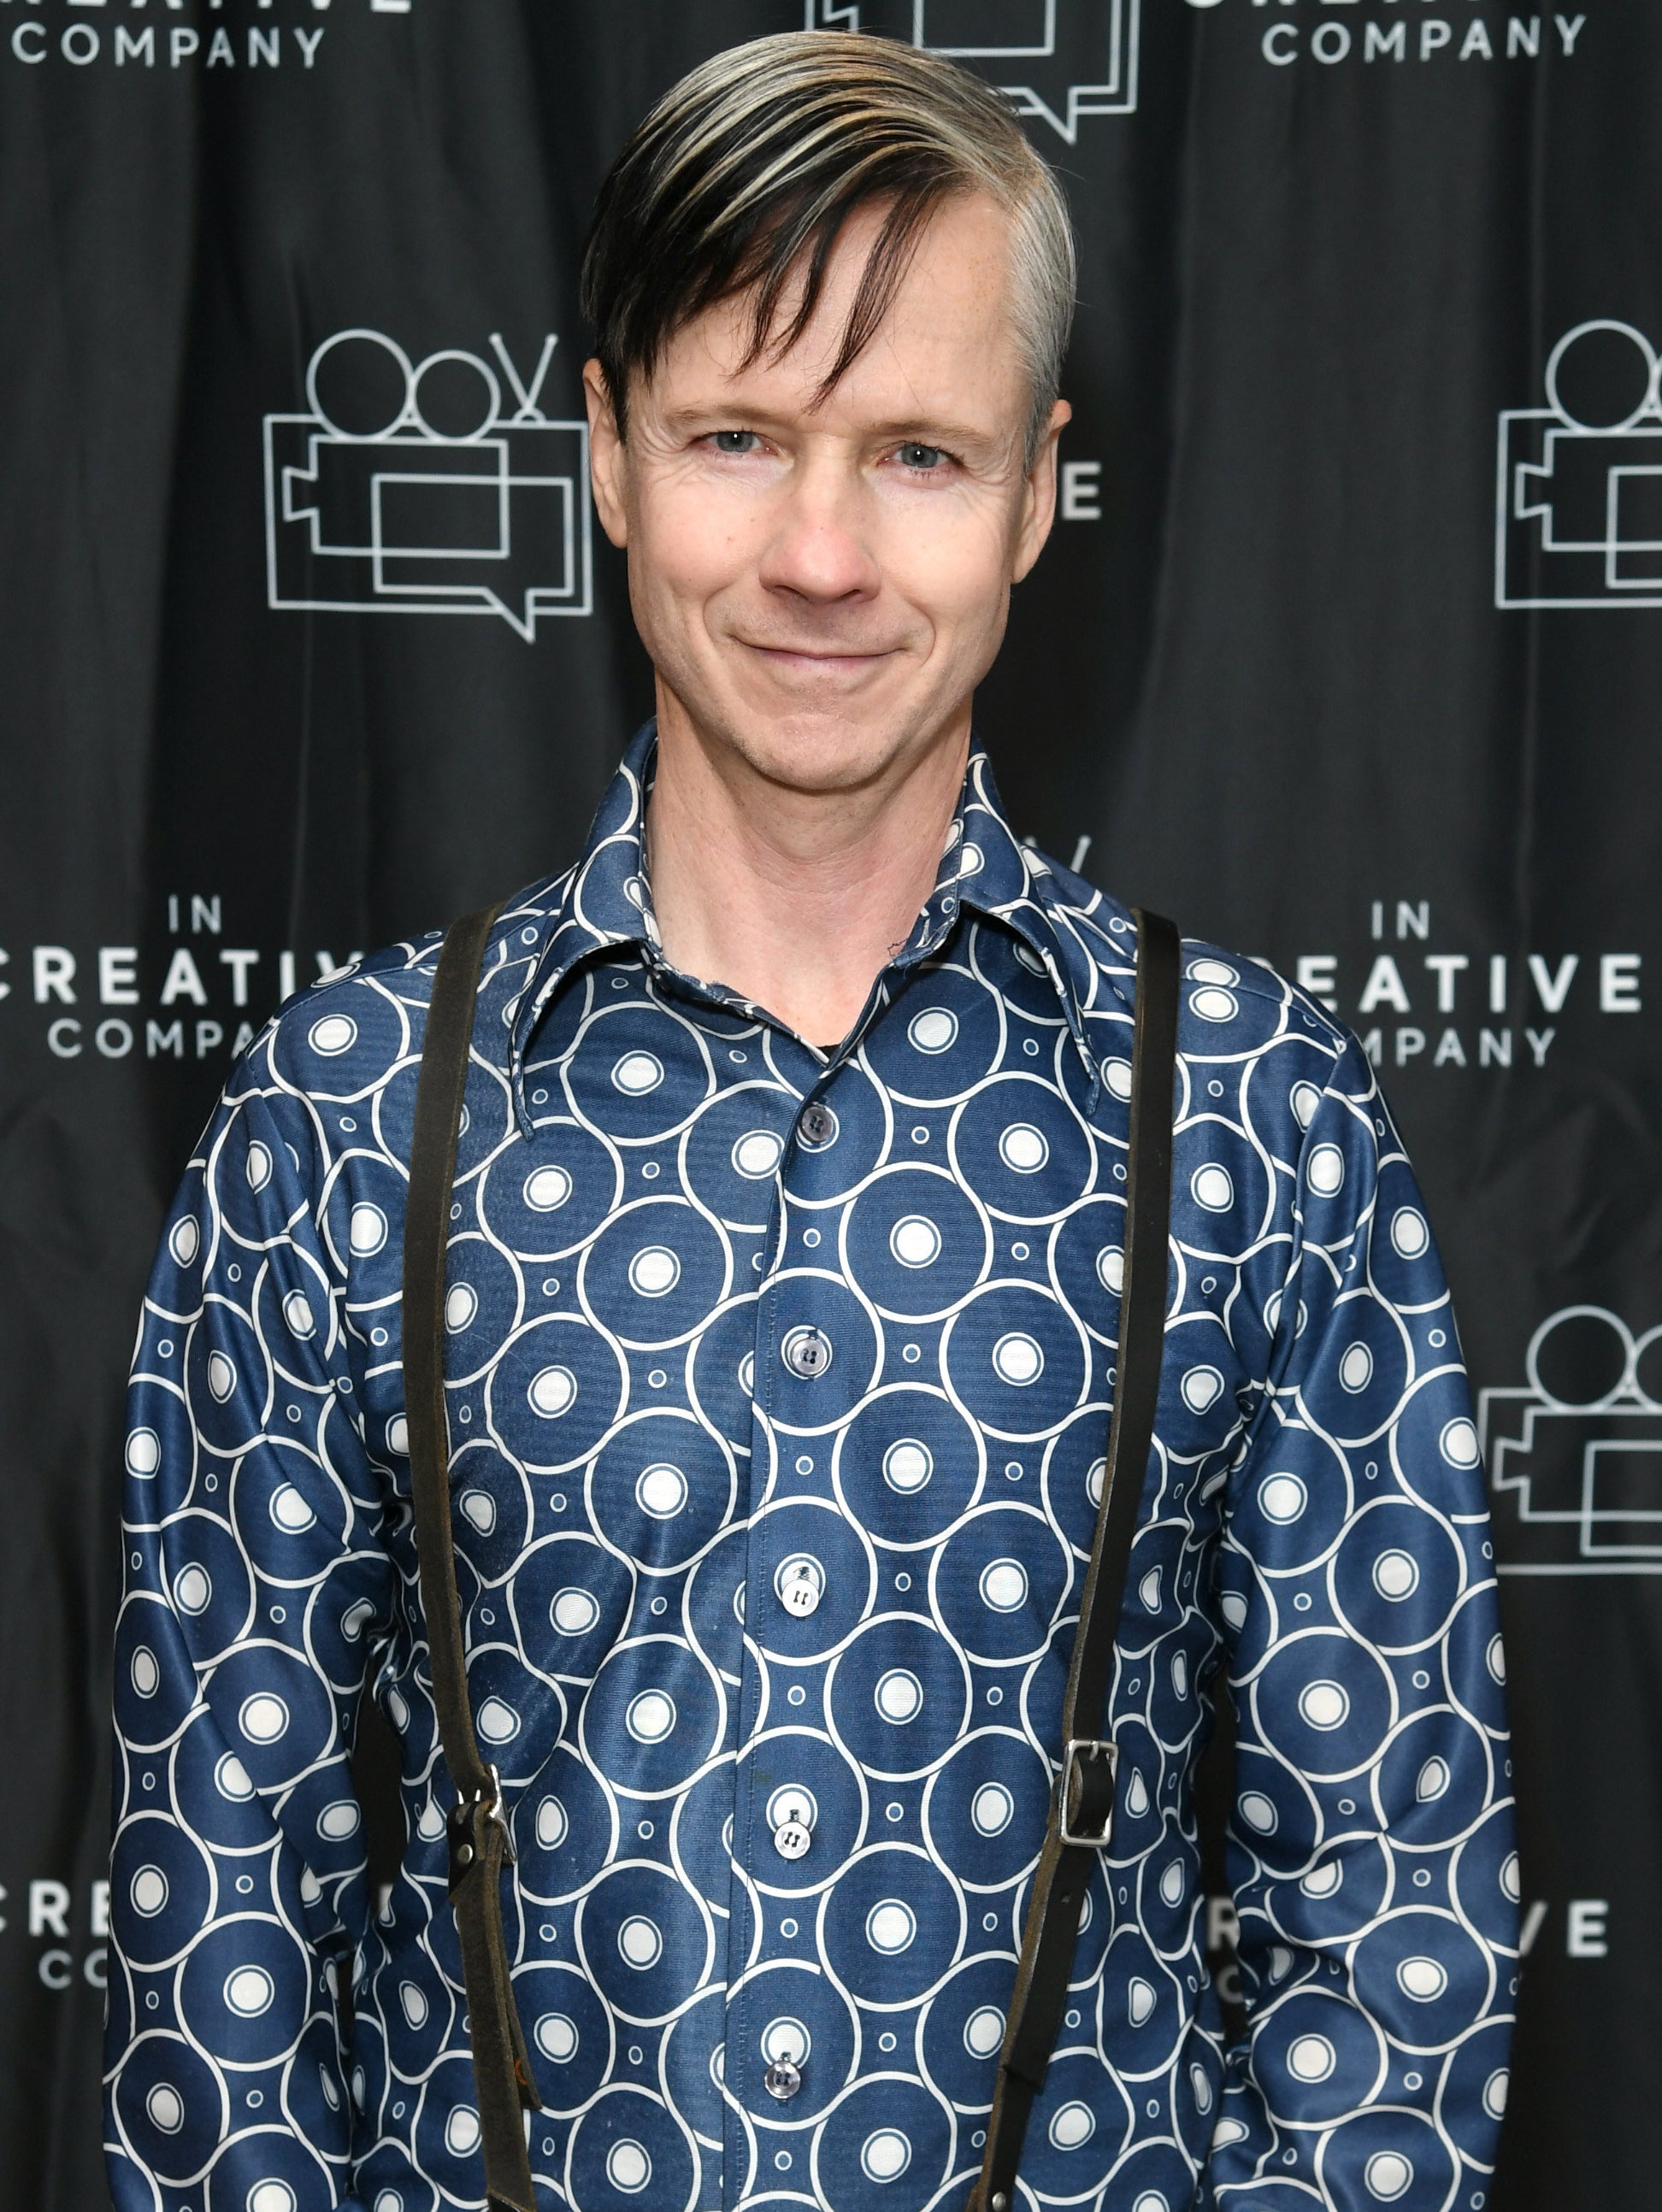 John Cameron Mitchell smiles at an event